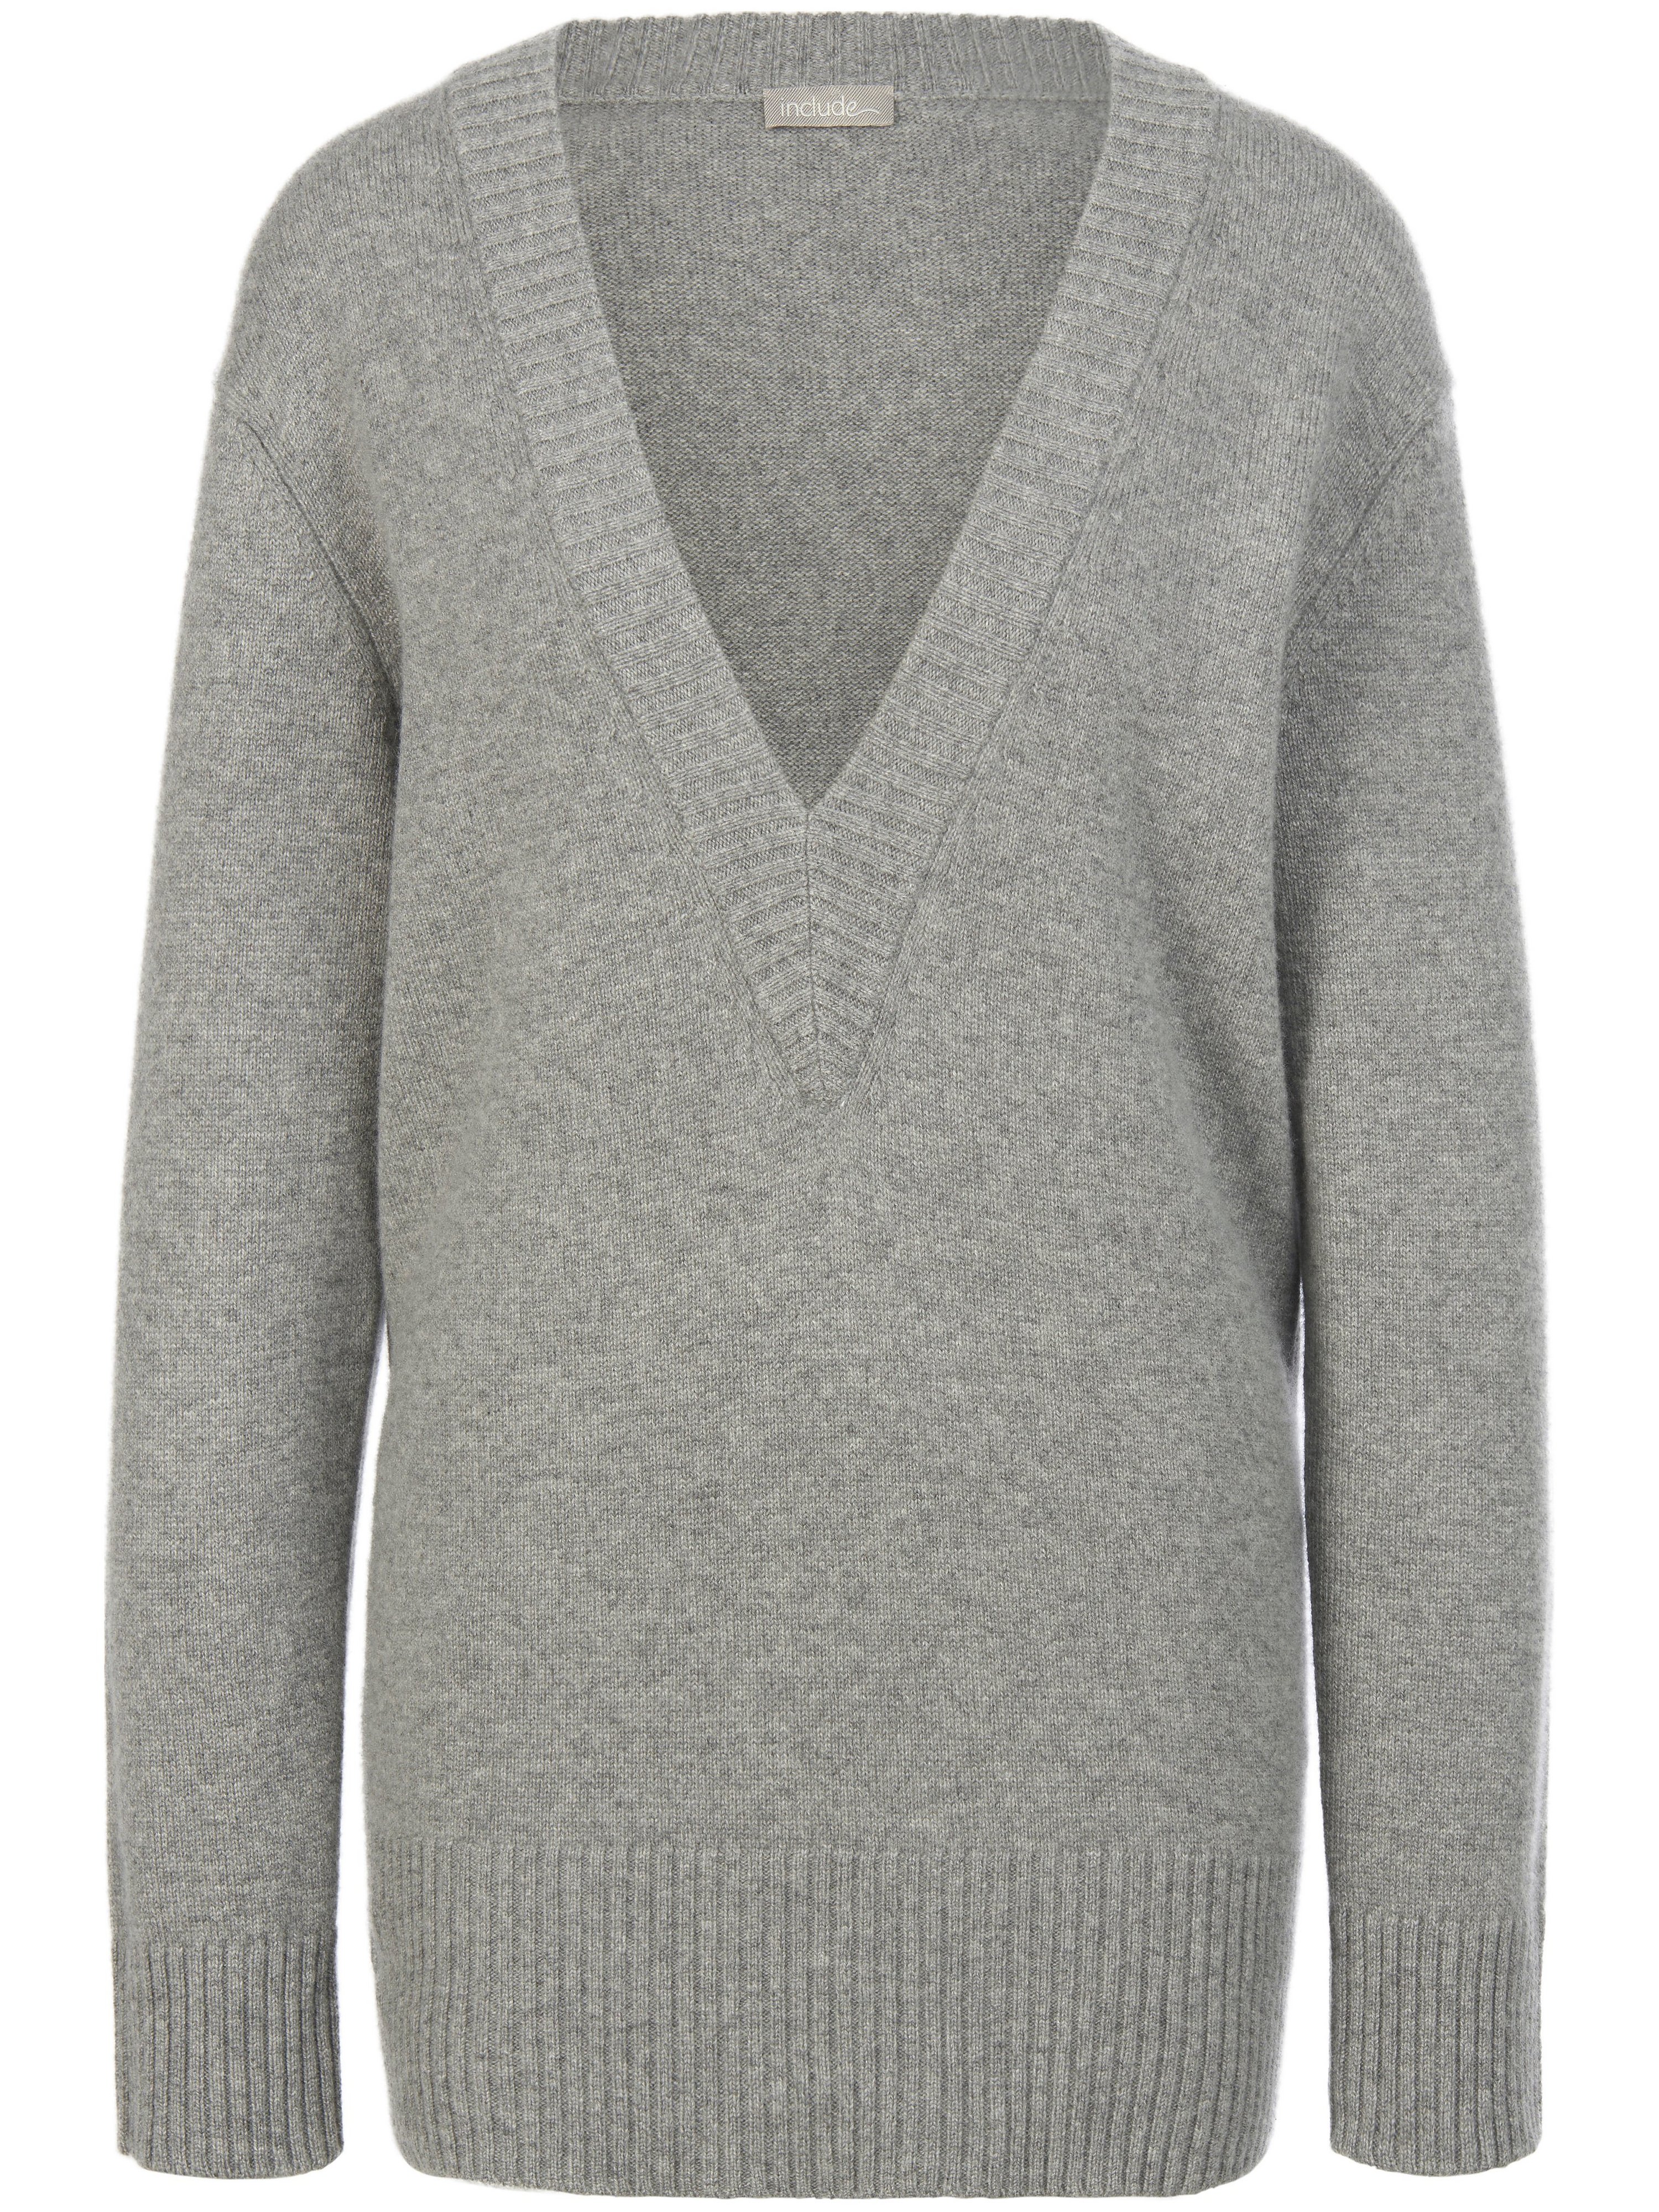 Le pull manches longues  include gris taille 40/42